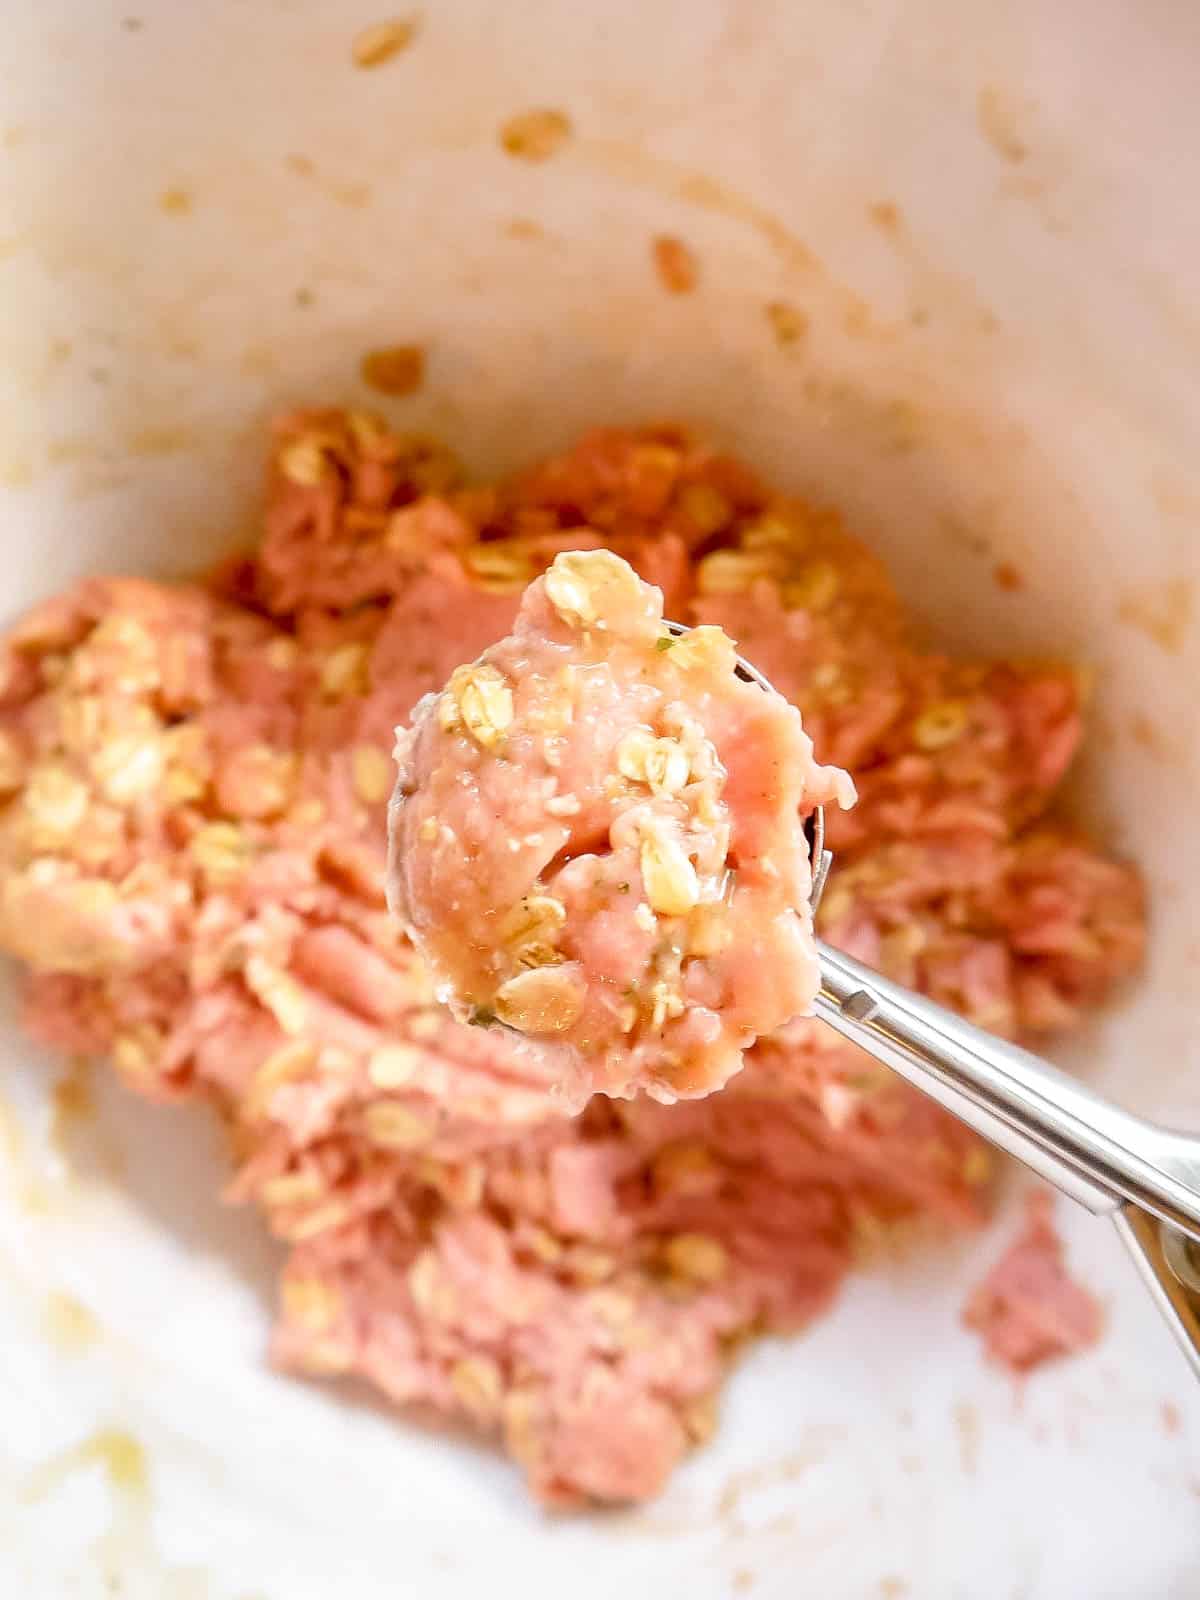 Meatball mixture scooped out in a cookie scoop.